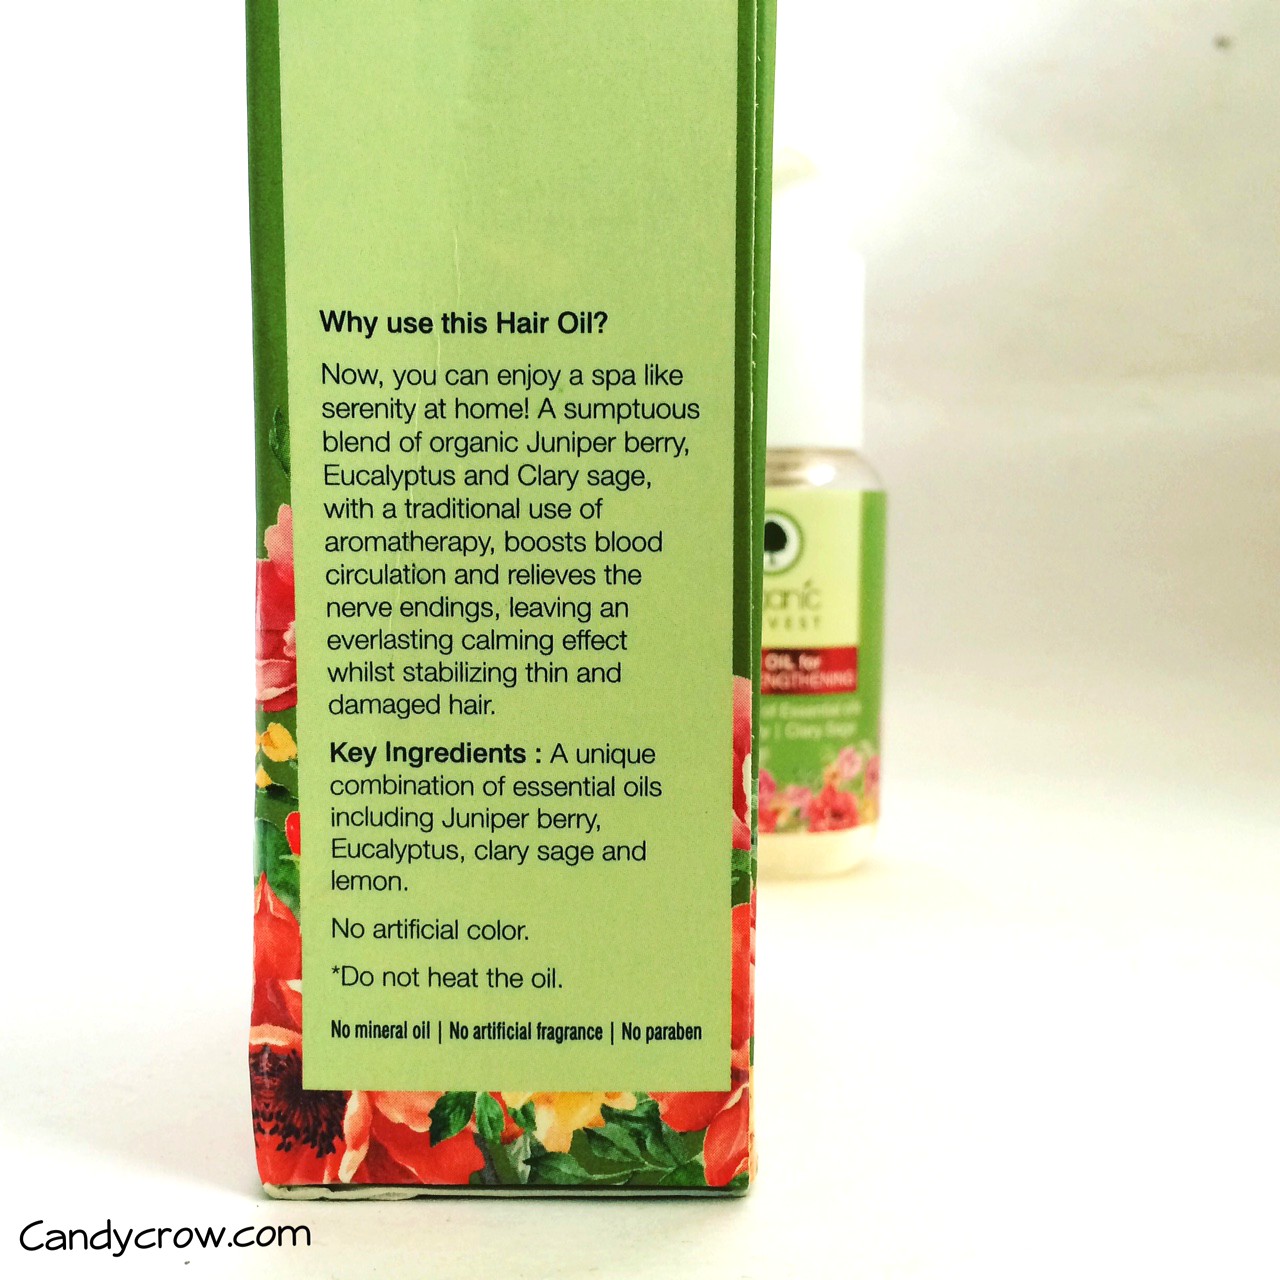 Organic-harvest-hair-oil-review-price